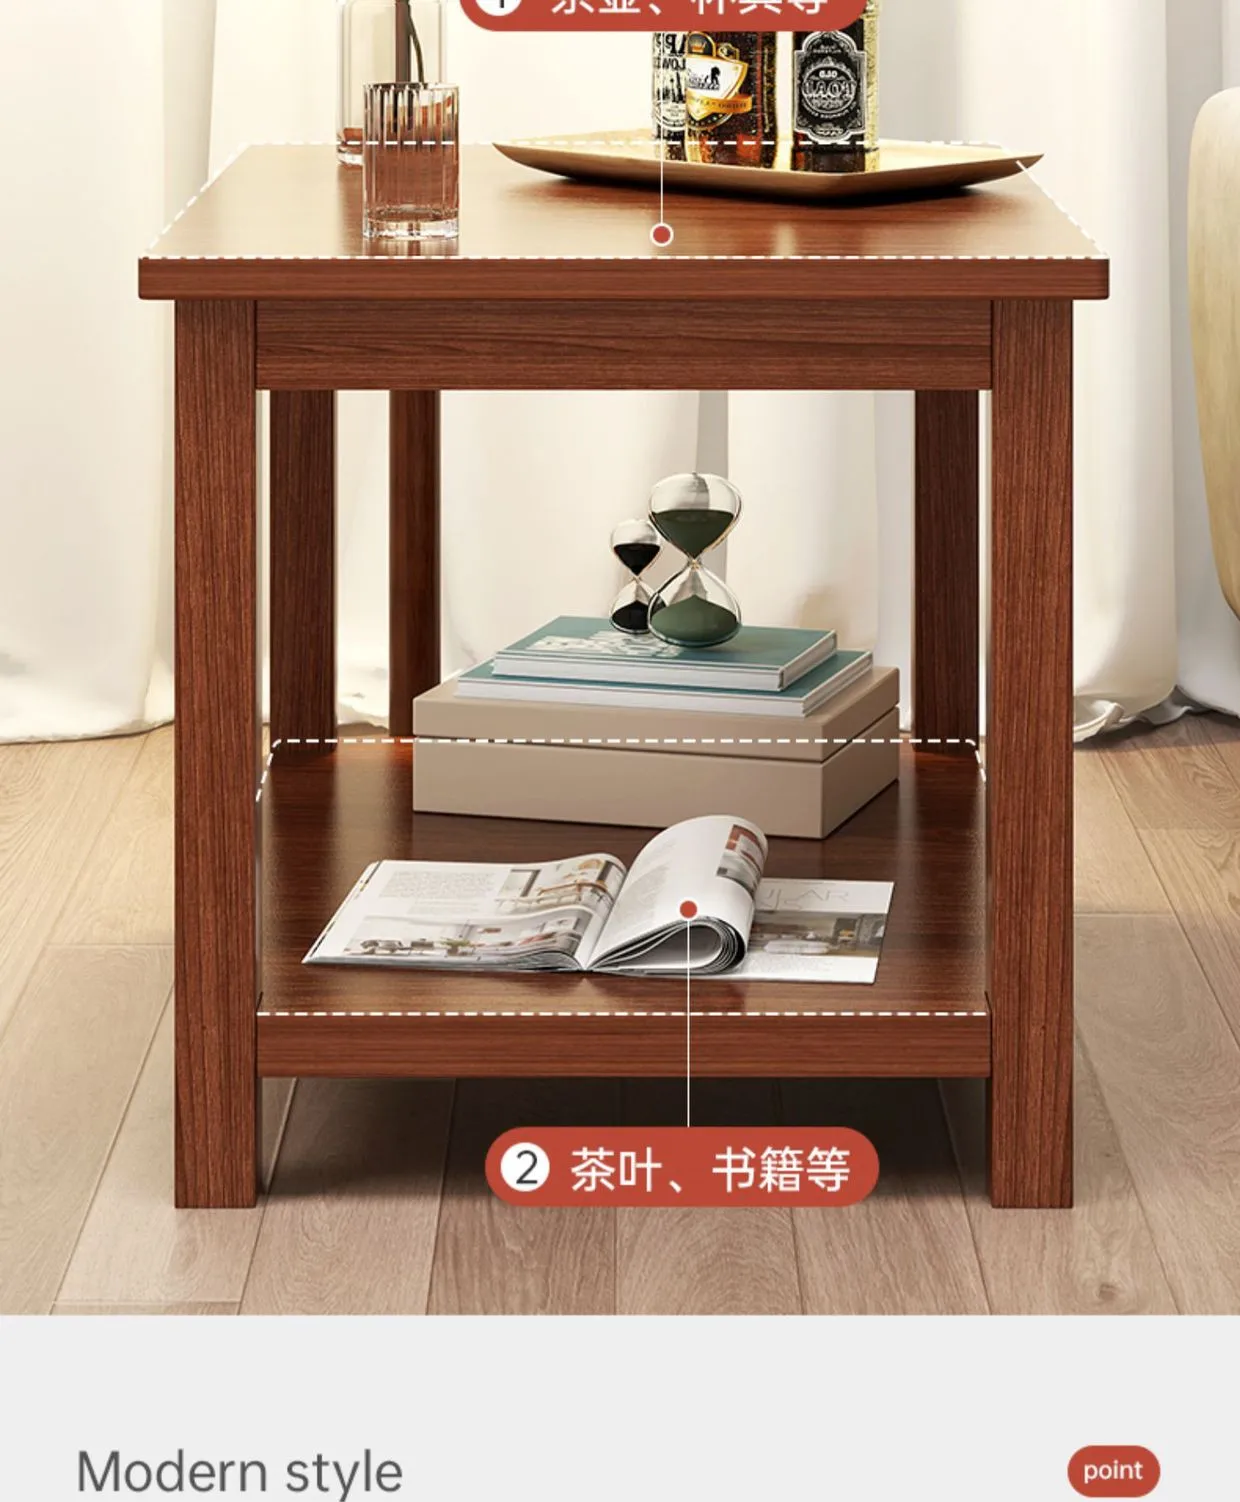 Wholesale New design wooden bedside table Rustic Solid Wood Coffee Table Tea Table home furniture living room office desk